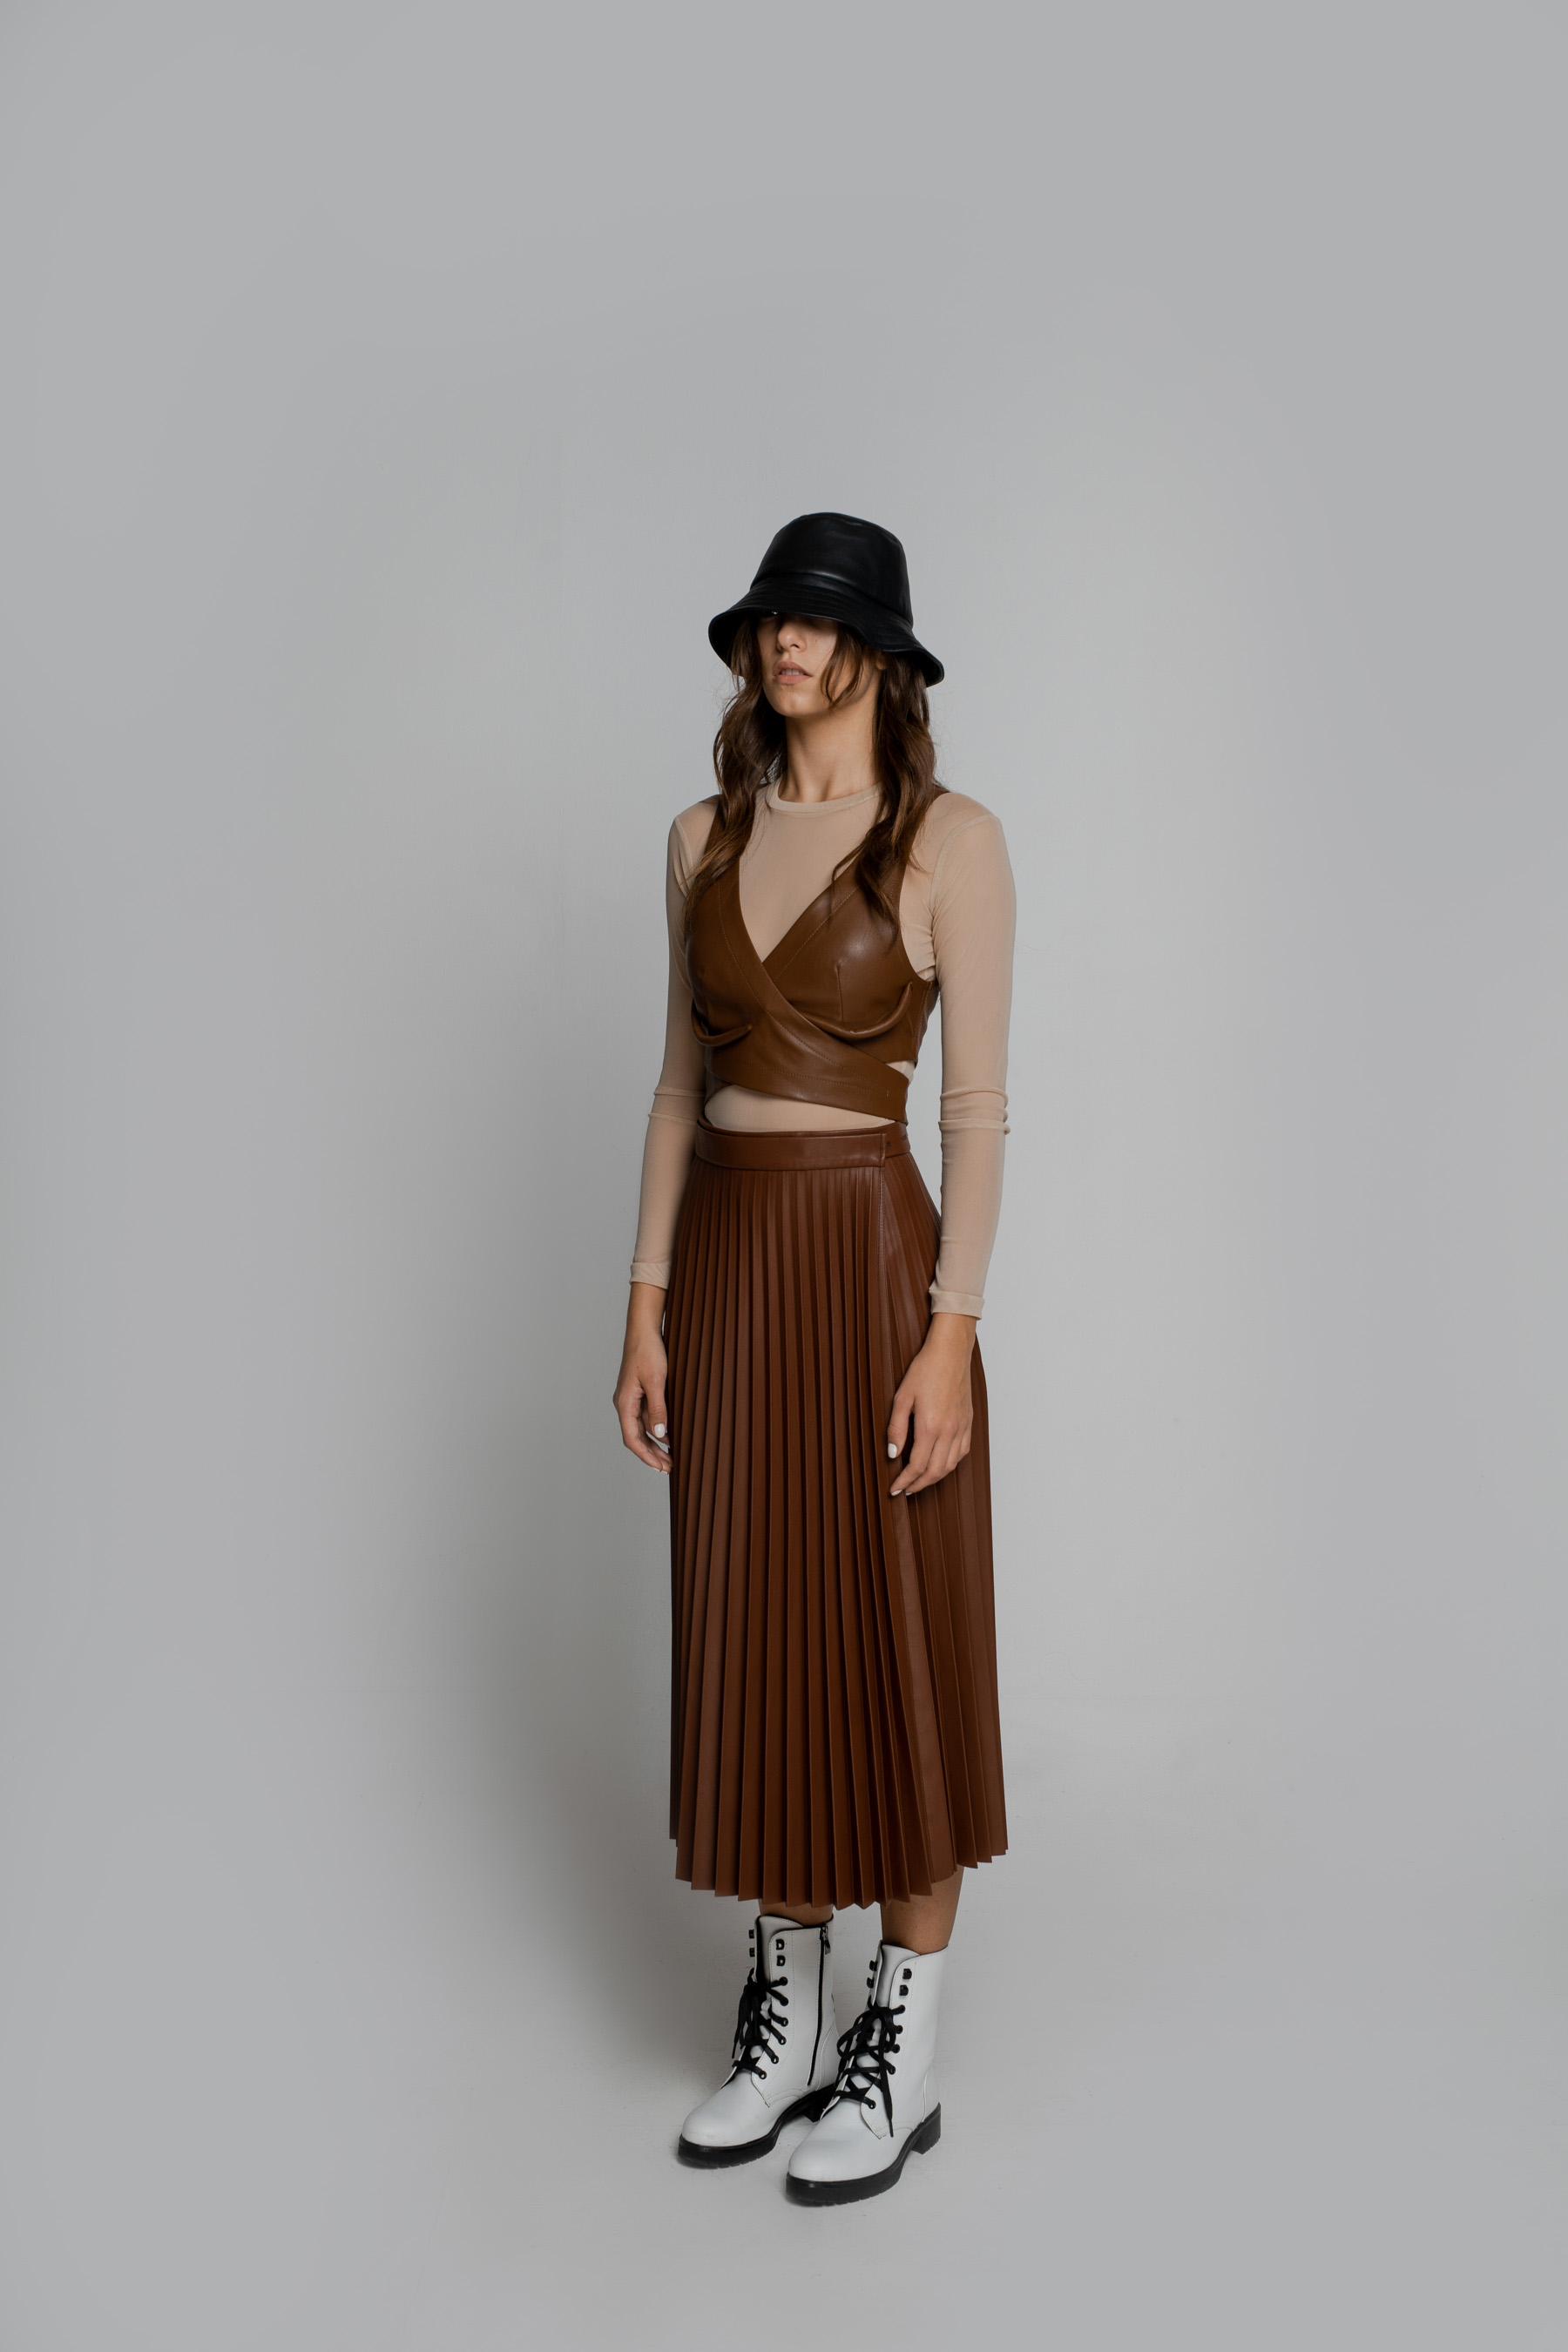 Wisteria ecoleather top in brown photo 5